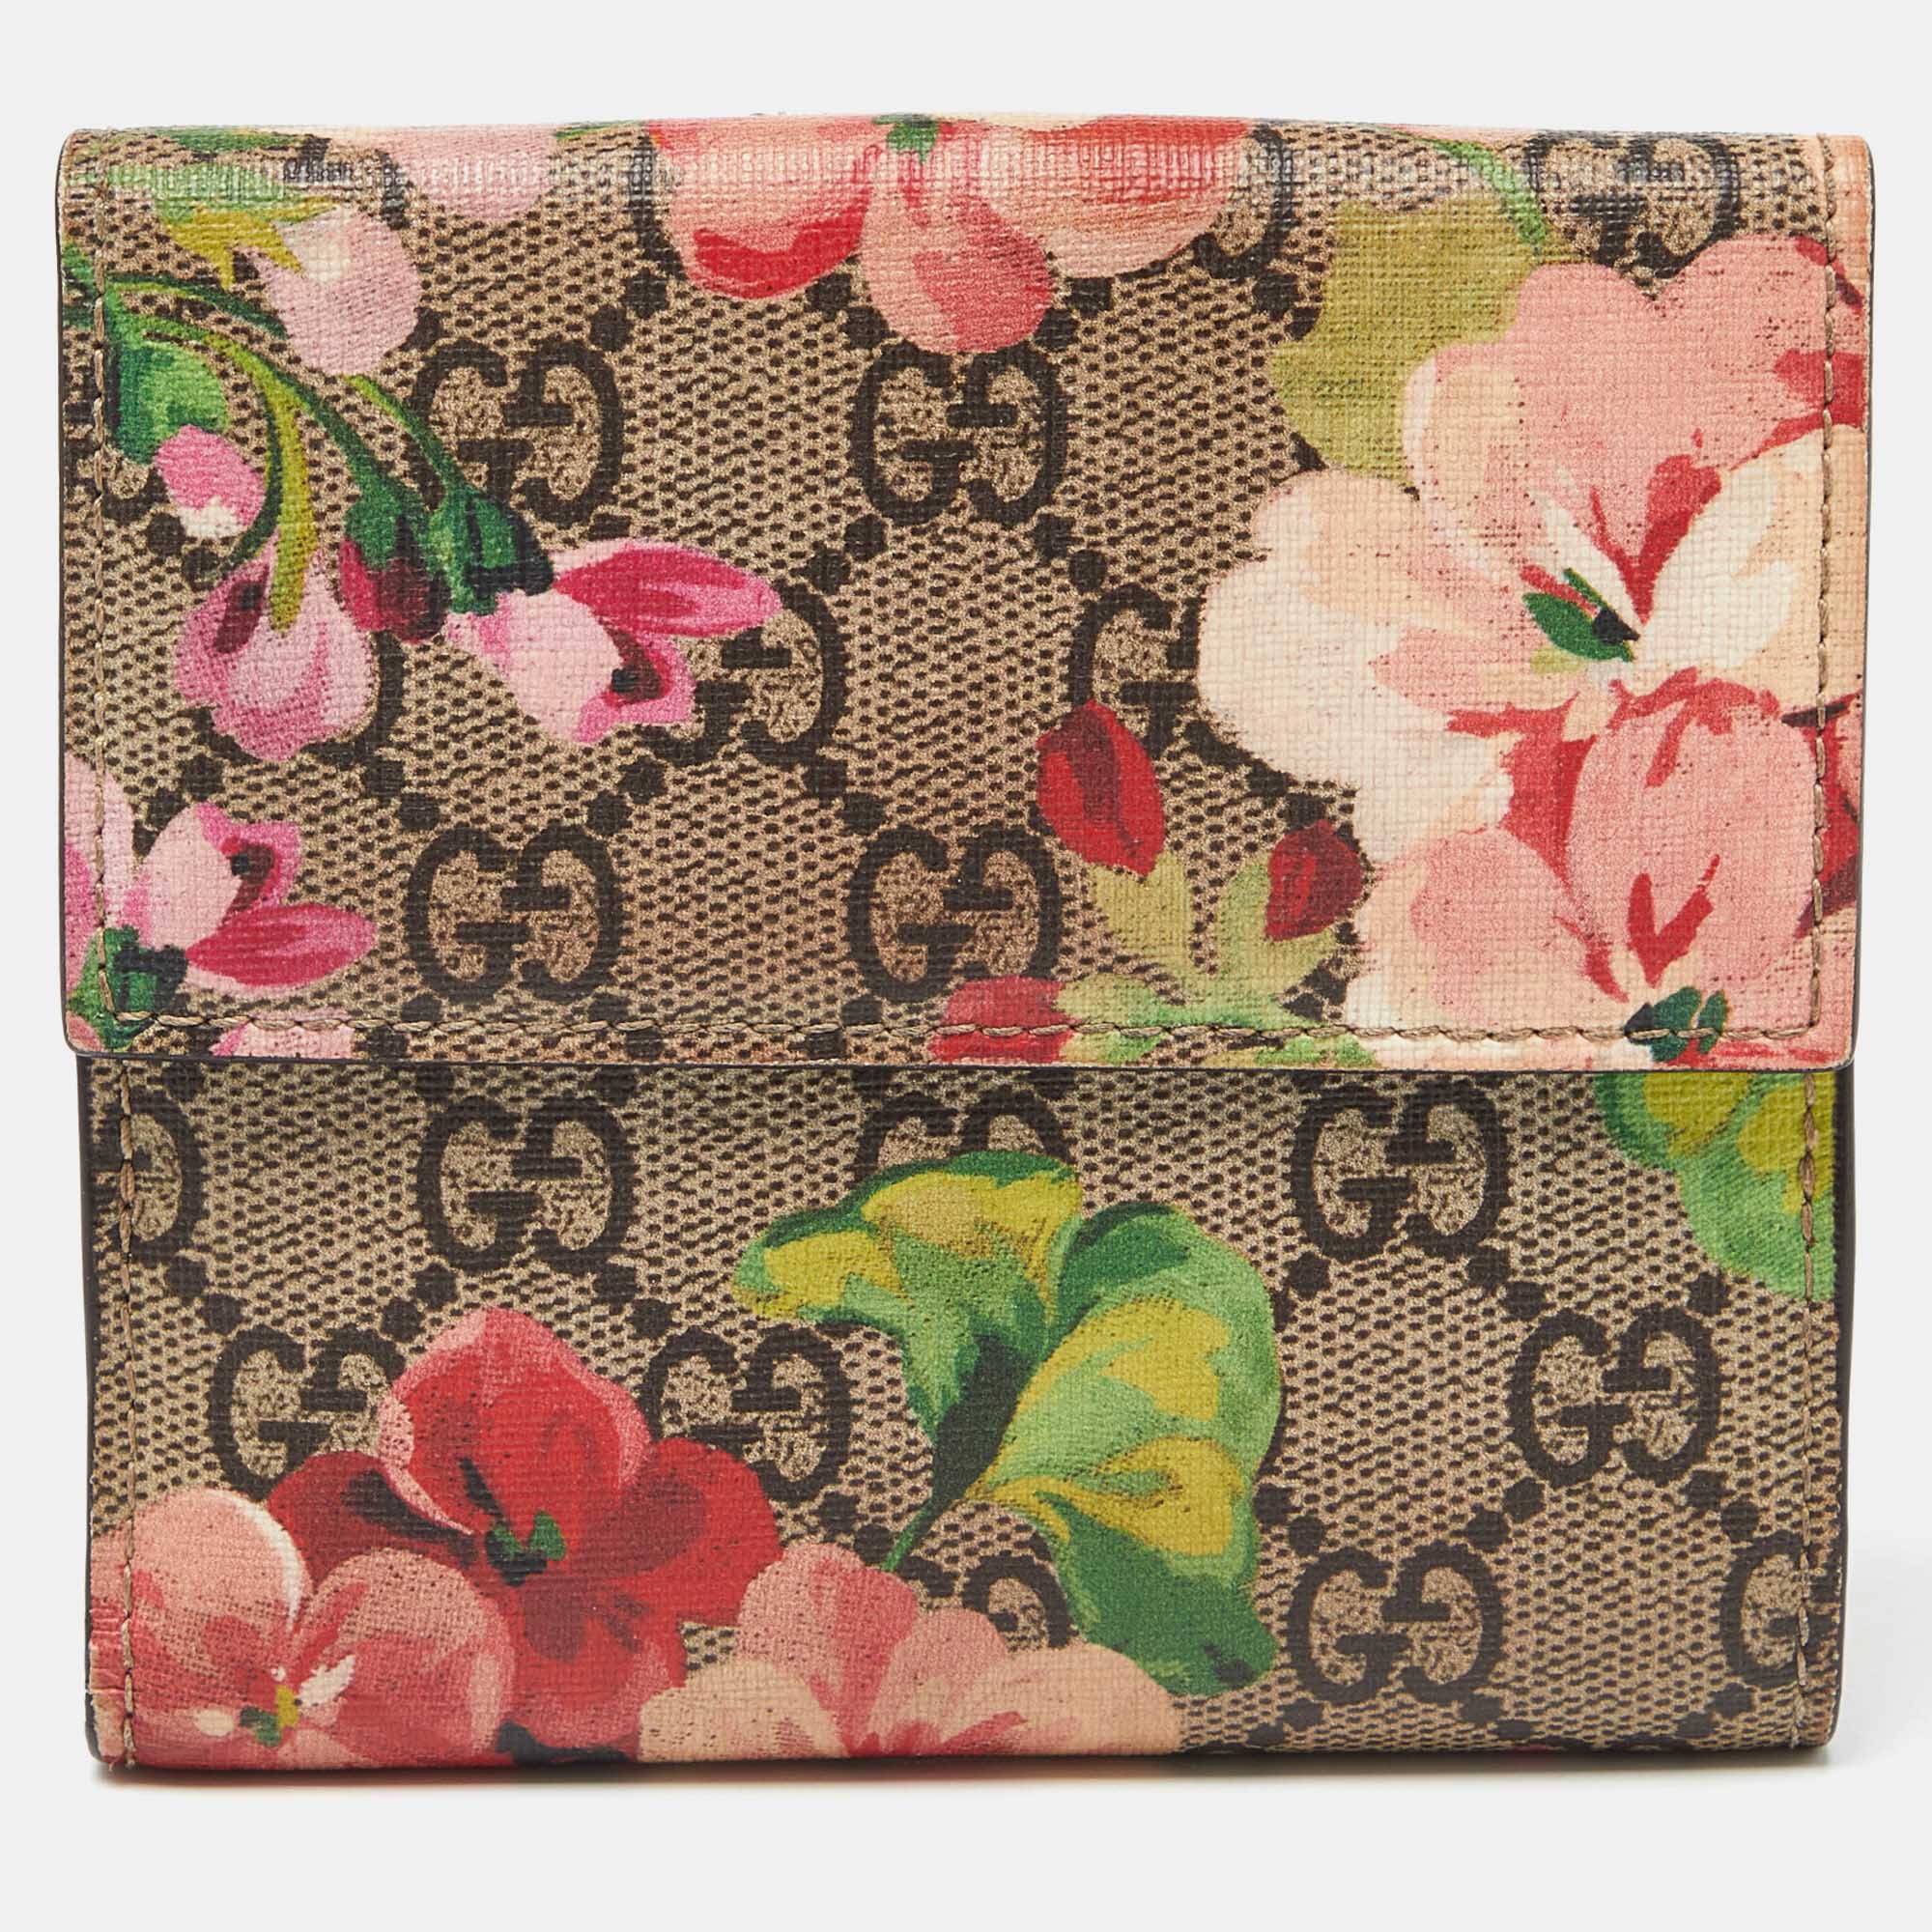 Pre-owned Gucci Multicolor Gg Supreme Blooms Canvas French Flap Wallet